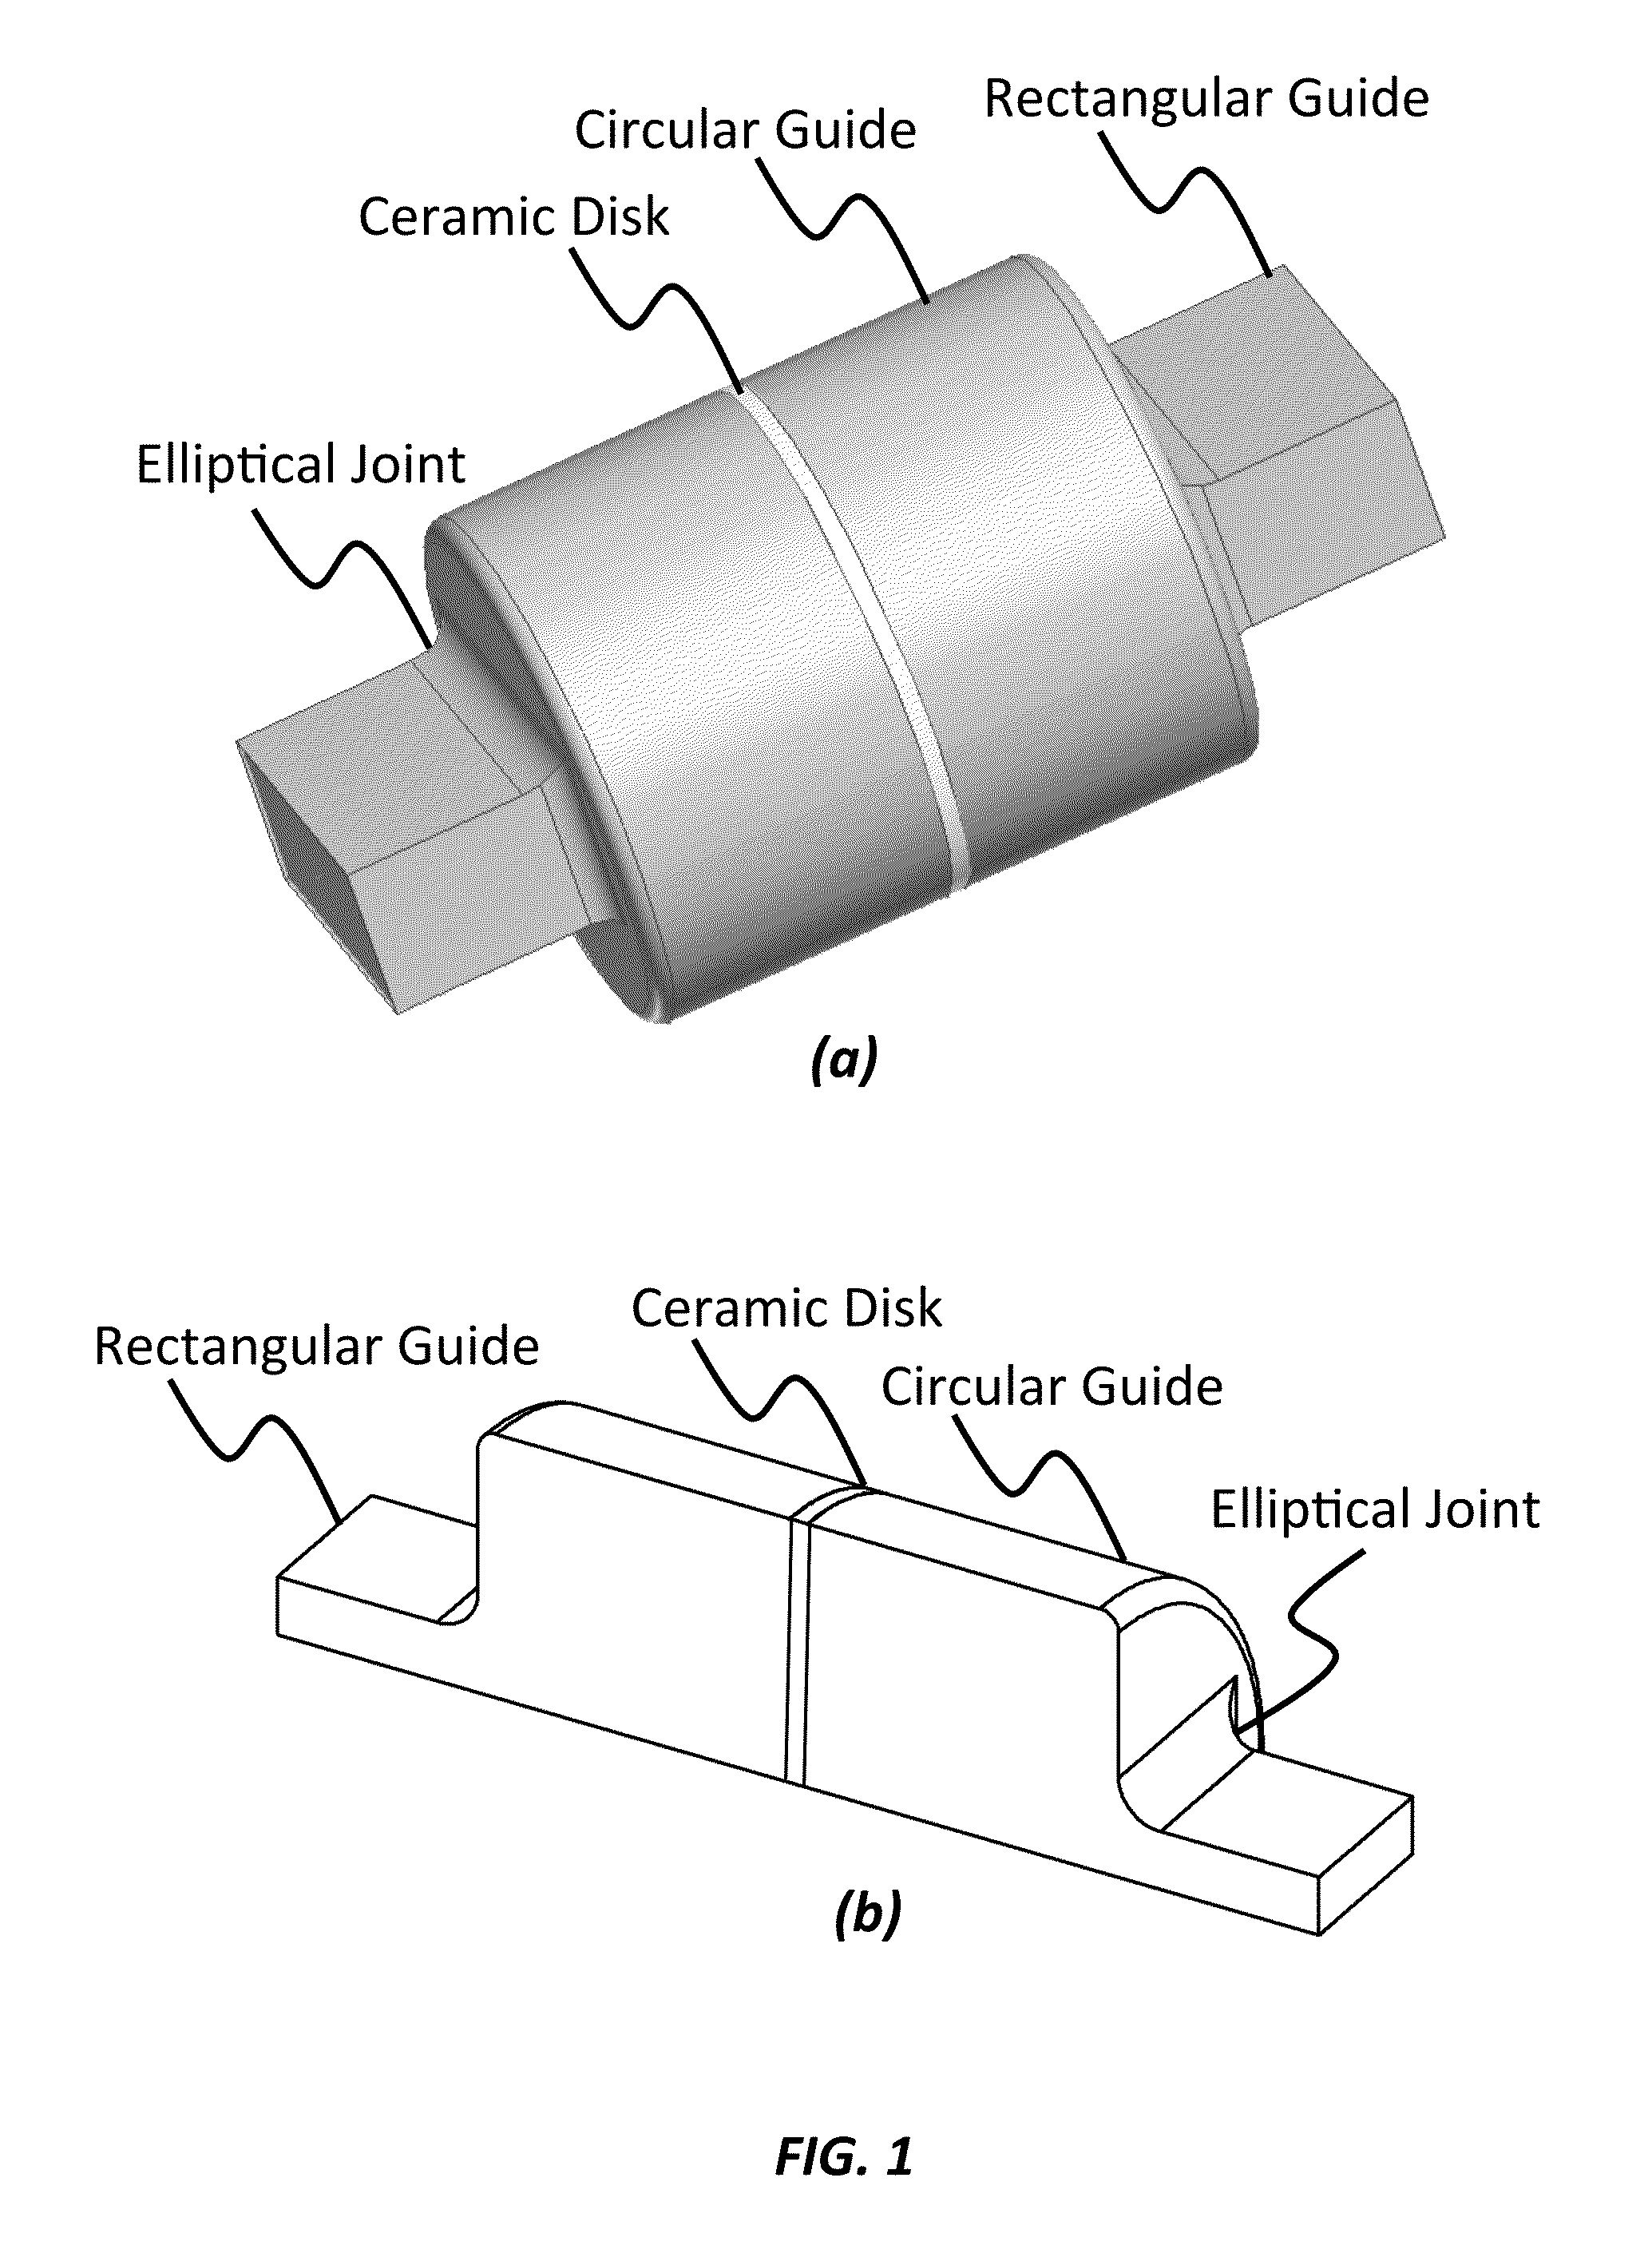 RF window assembly comprising a ceramic disk disposed within a cylindrical waveguide which is connected to rectangular waveguides through elliptical joints